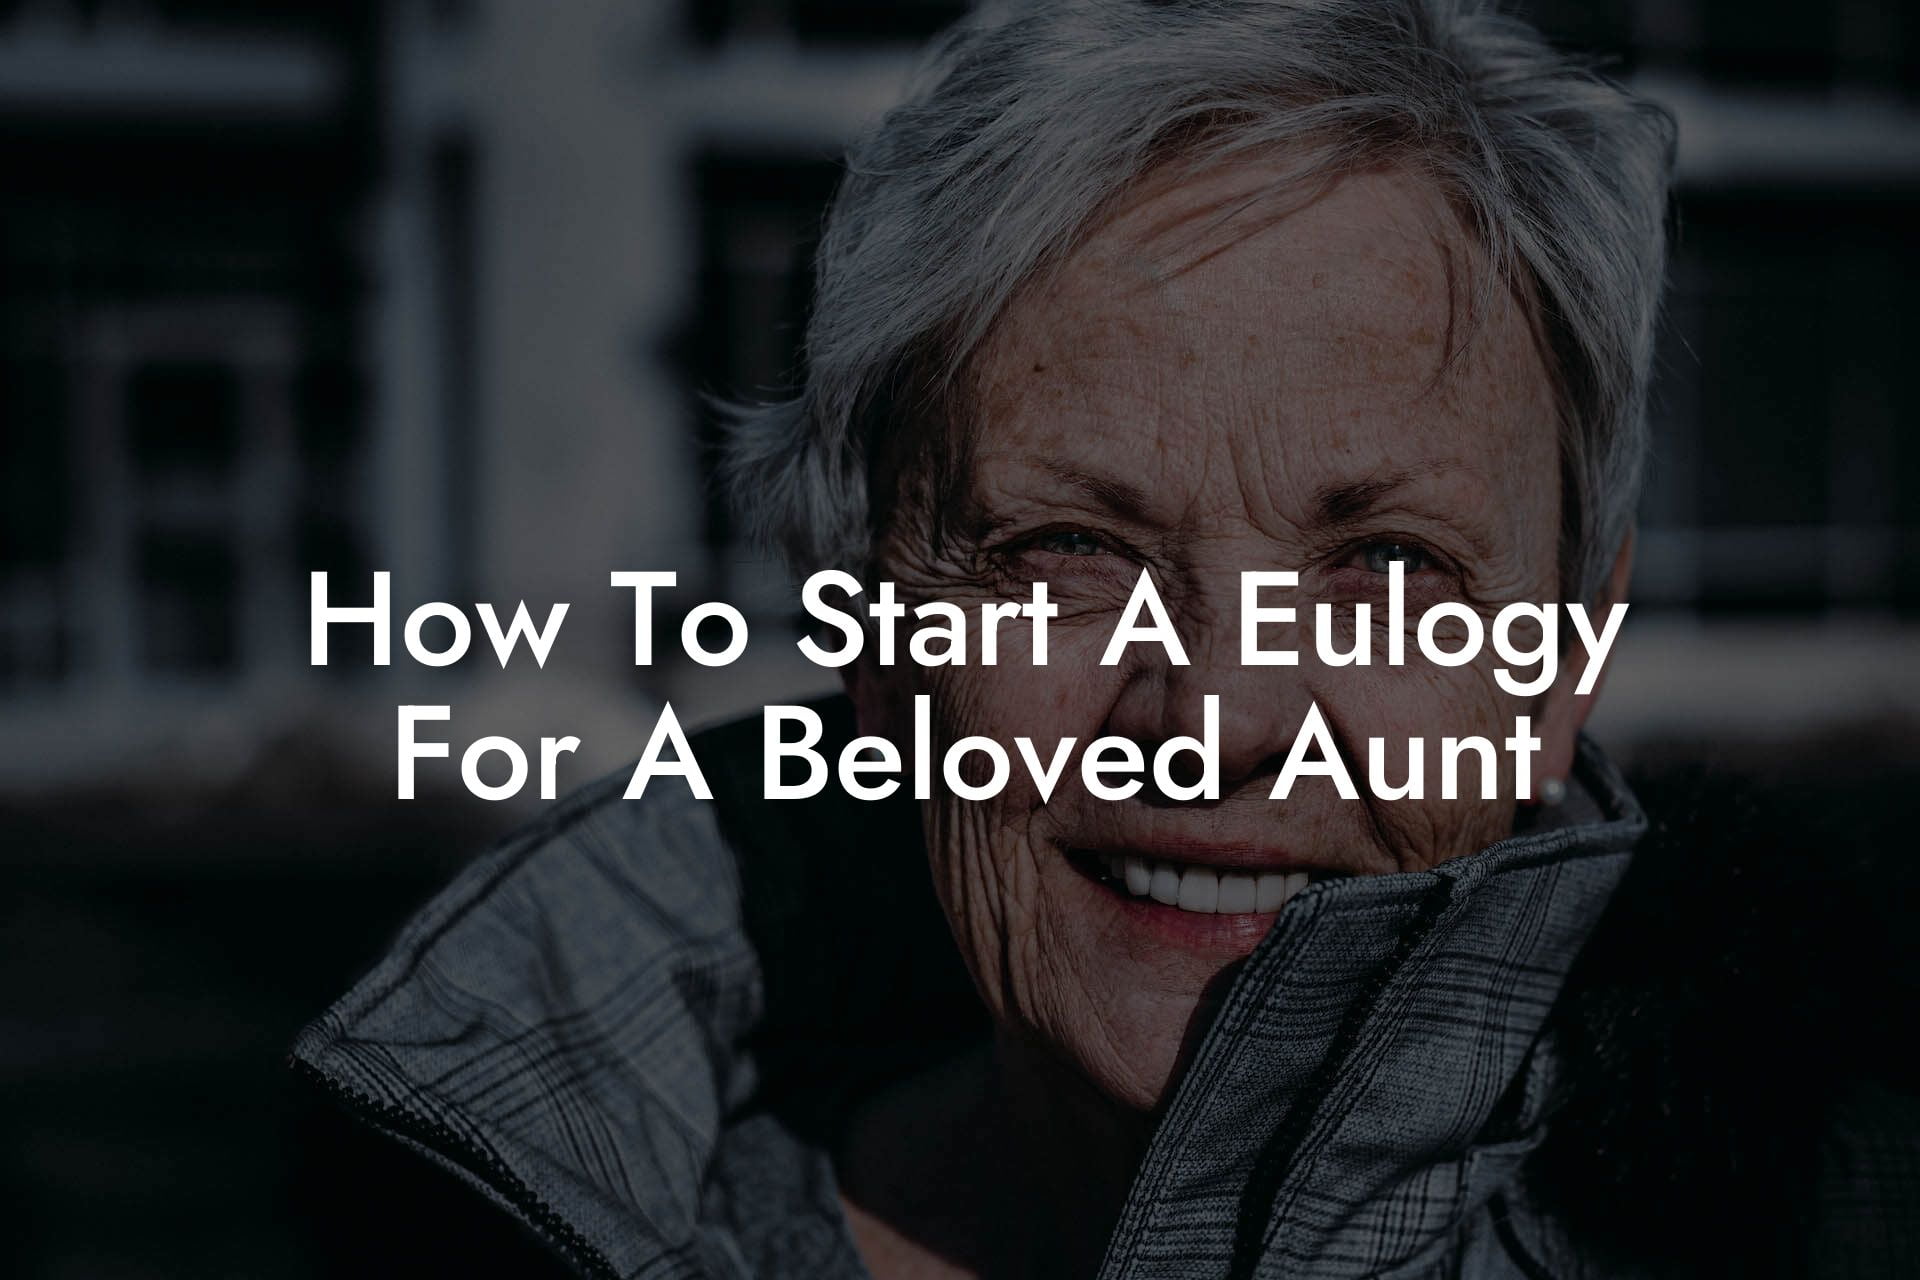 How To Start A Eulogy For A Beloved Aunt